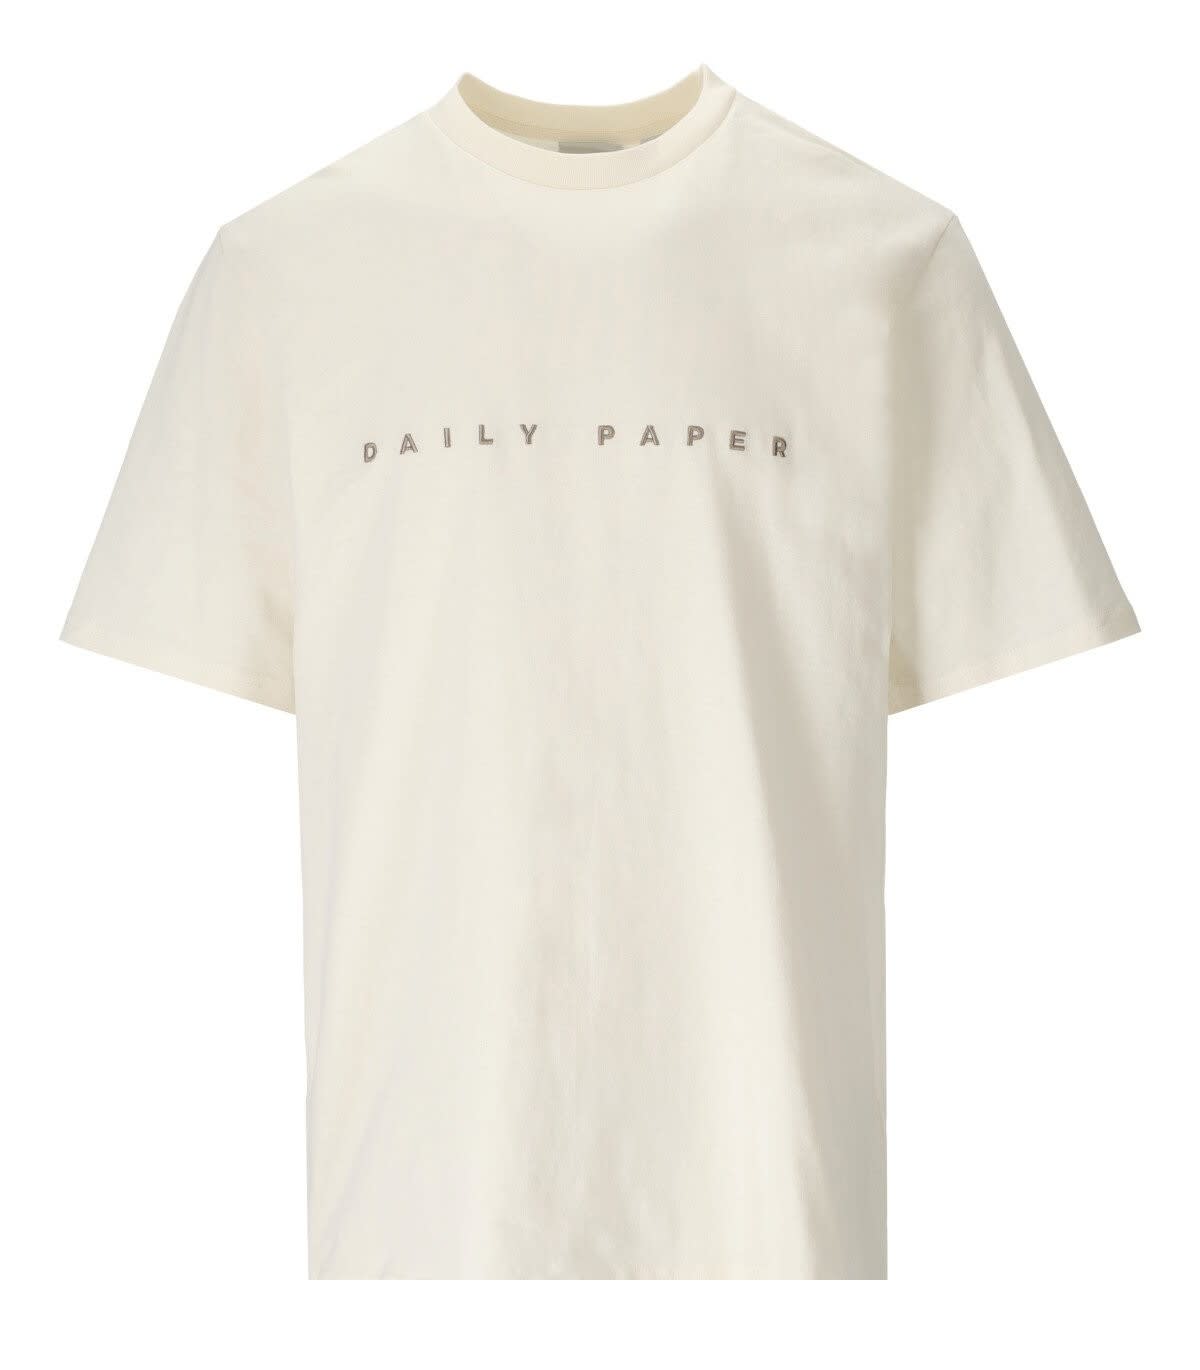 DAILY PAPER DAILY PAPER ALIAS EGRET WHITE T-SHIRT